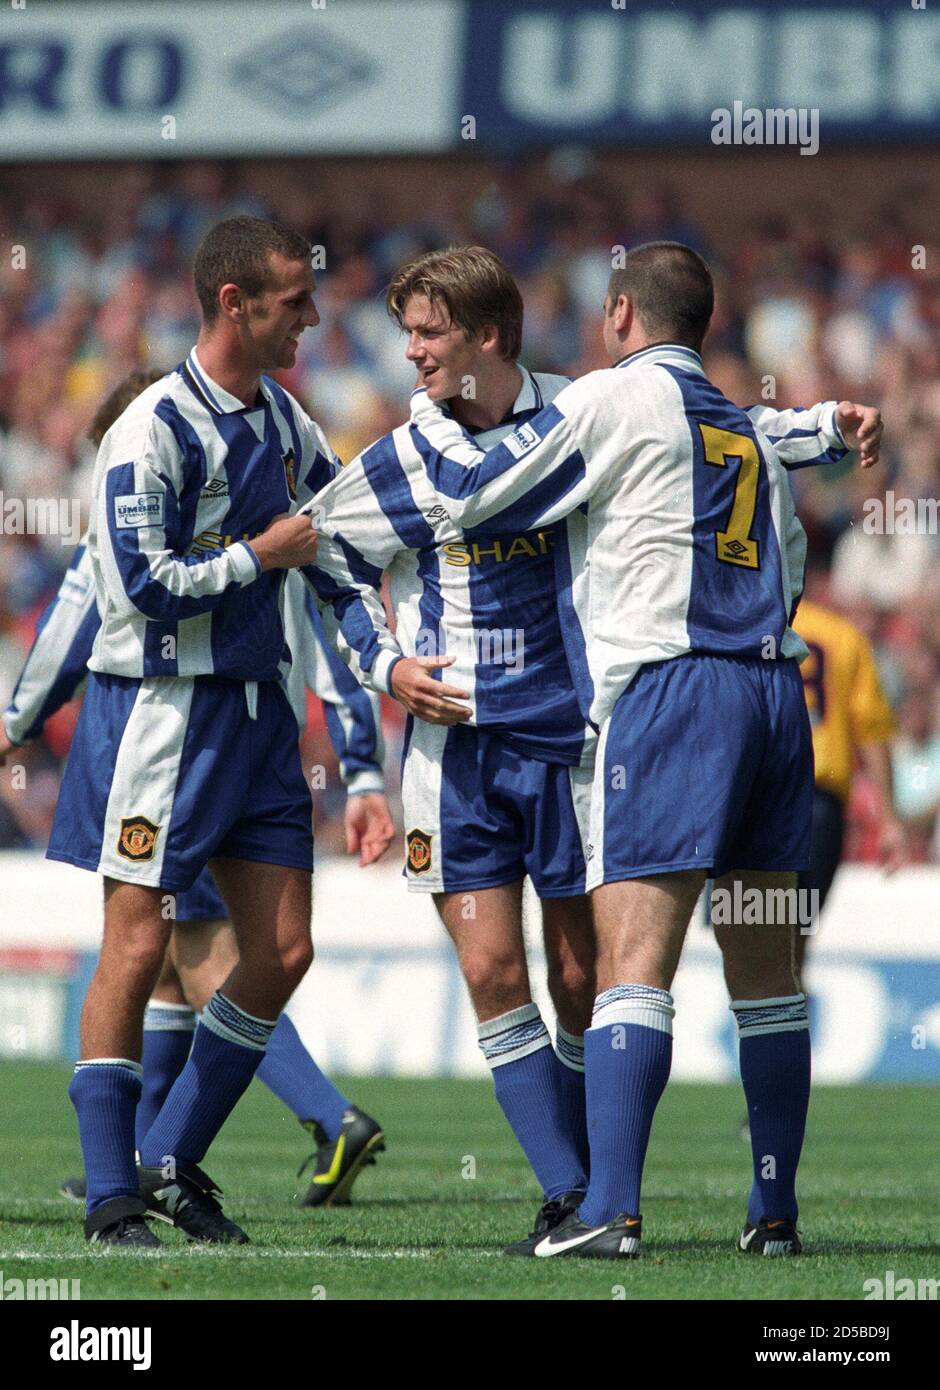 MANCHESTER UNITED'S BECKHAM CELEBRATES GOAL WITH TEAMMATES DURING UMBRO  INTERNATIONAL TOURNAMENT IN NOTTINGHAM. Manchester United's David Beckham  (2L) celebrates his goal with Eric Cantona (R) and another team mate in the  3rd